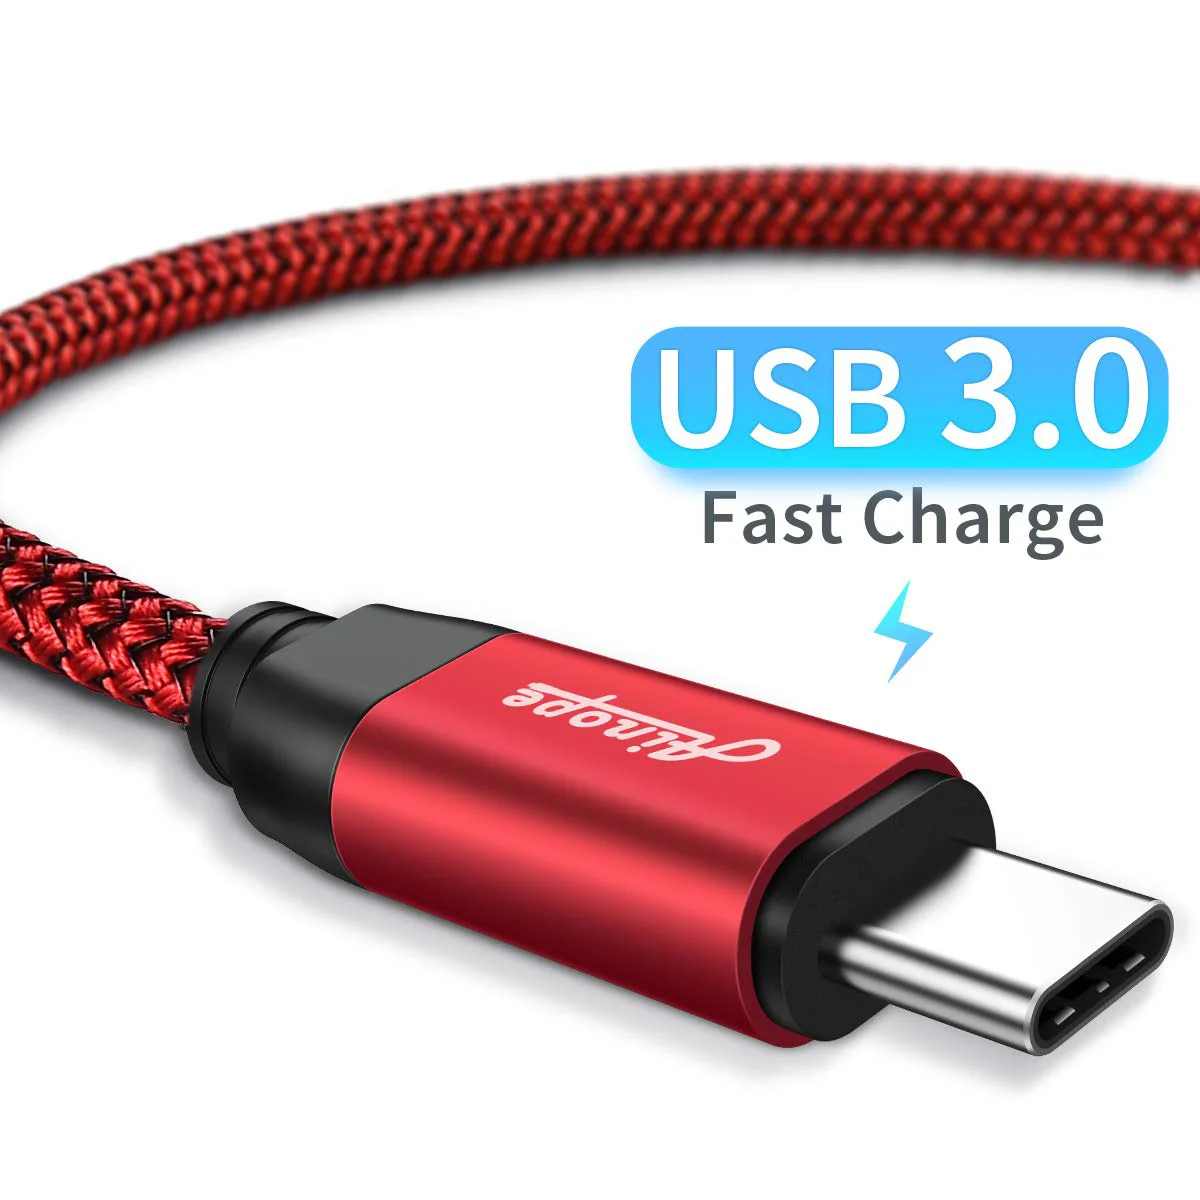 Type c fast charge. Atom fast кабель. USB fast a18. Type c Cord Black. Also faster